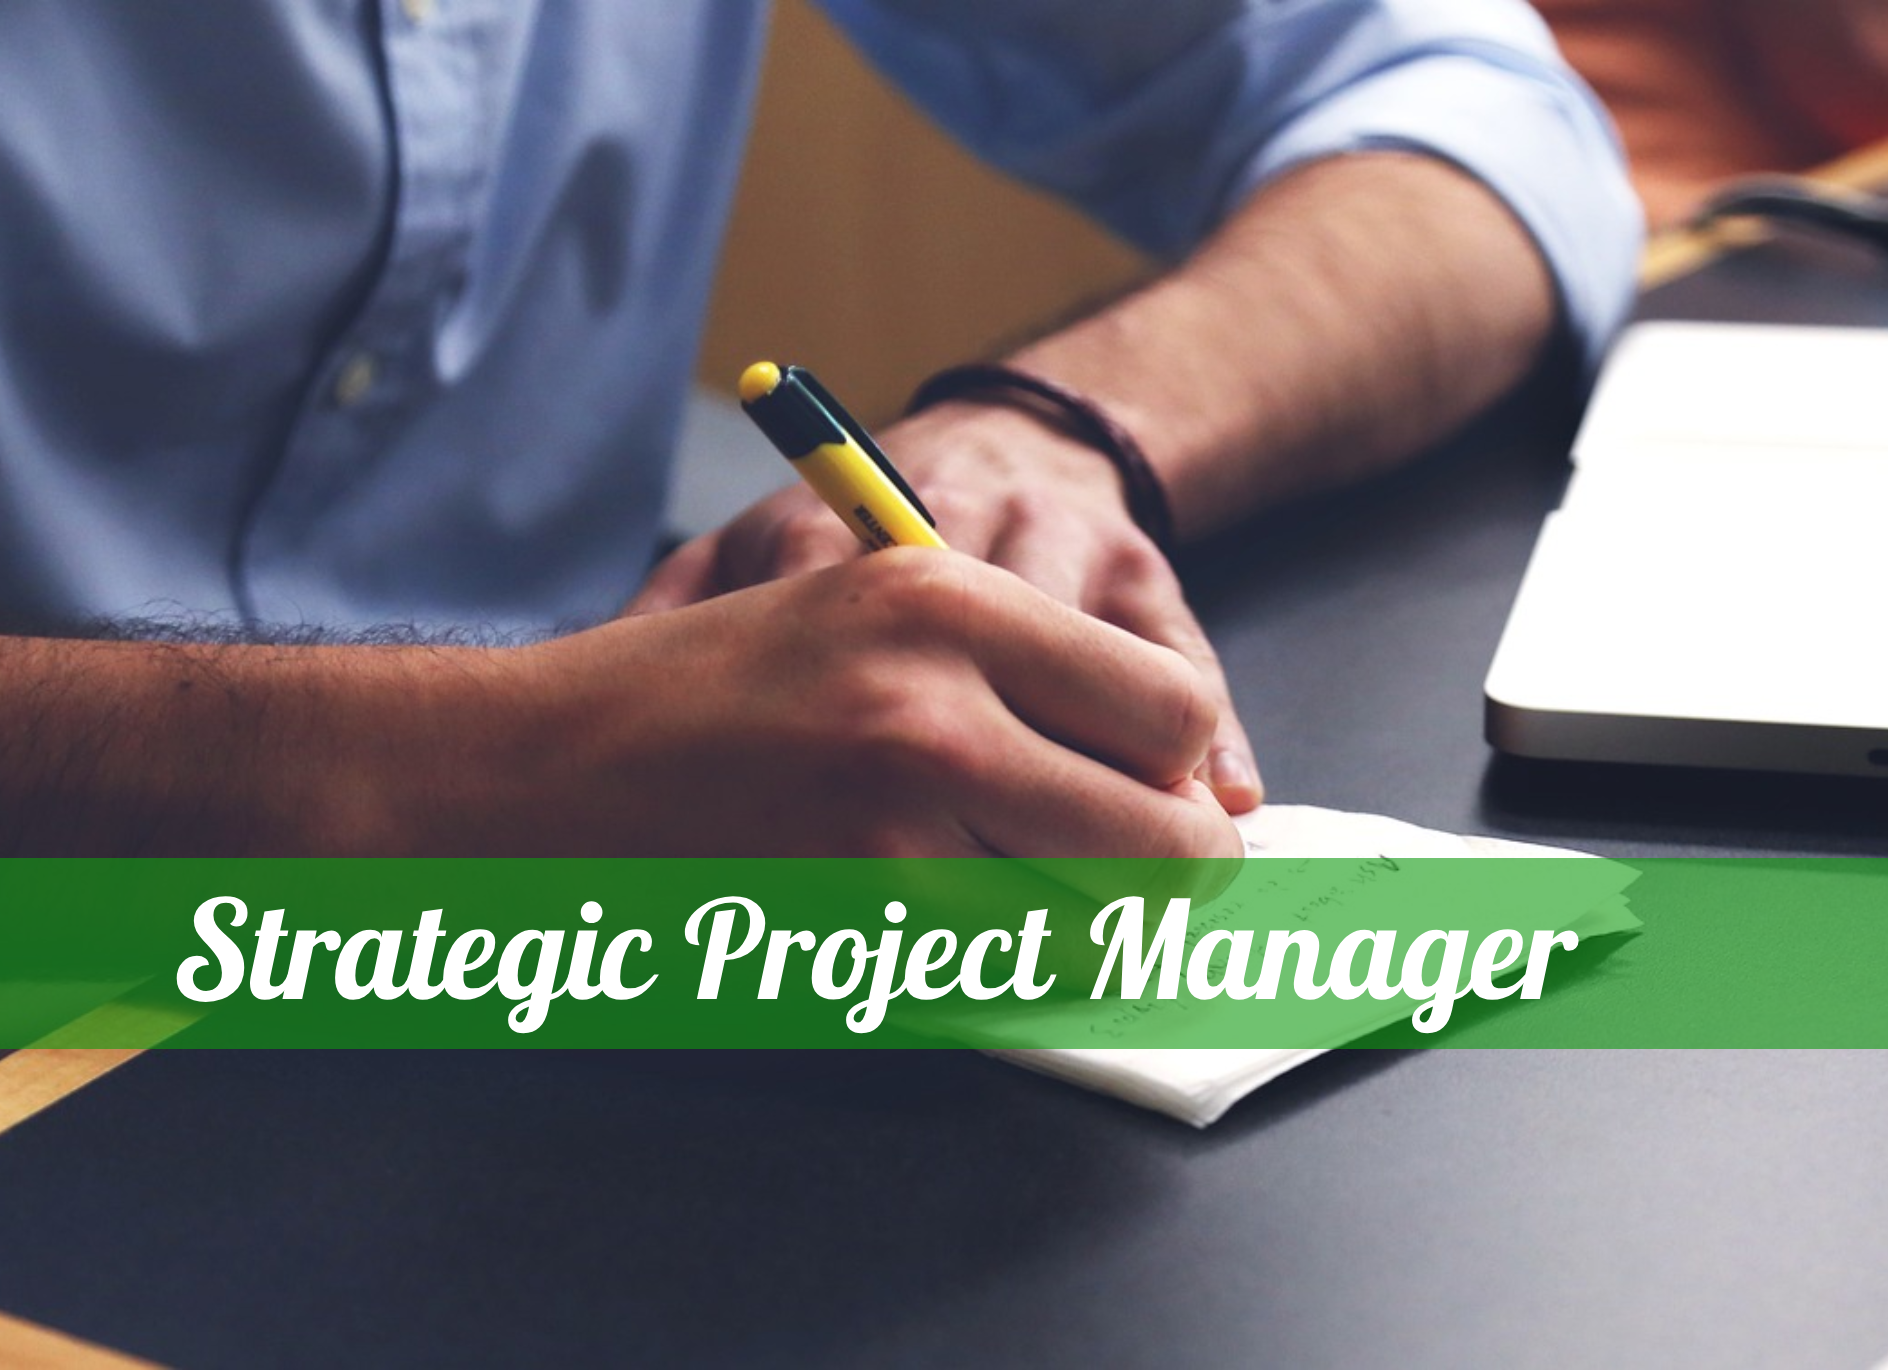 Strategic Project Manager Opportunity with Social and Humanitarian Assistance Organization (SHAO)